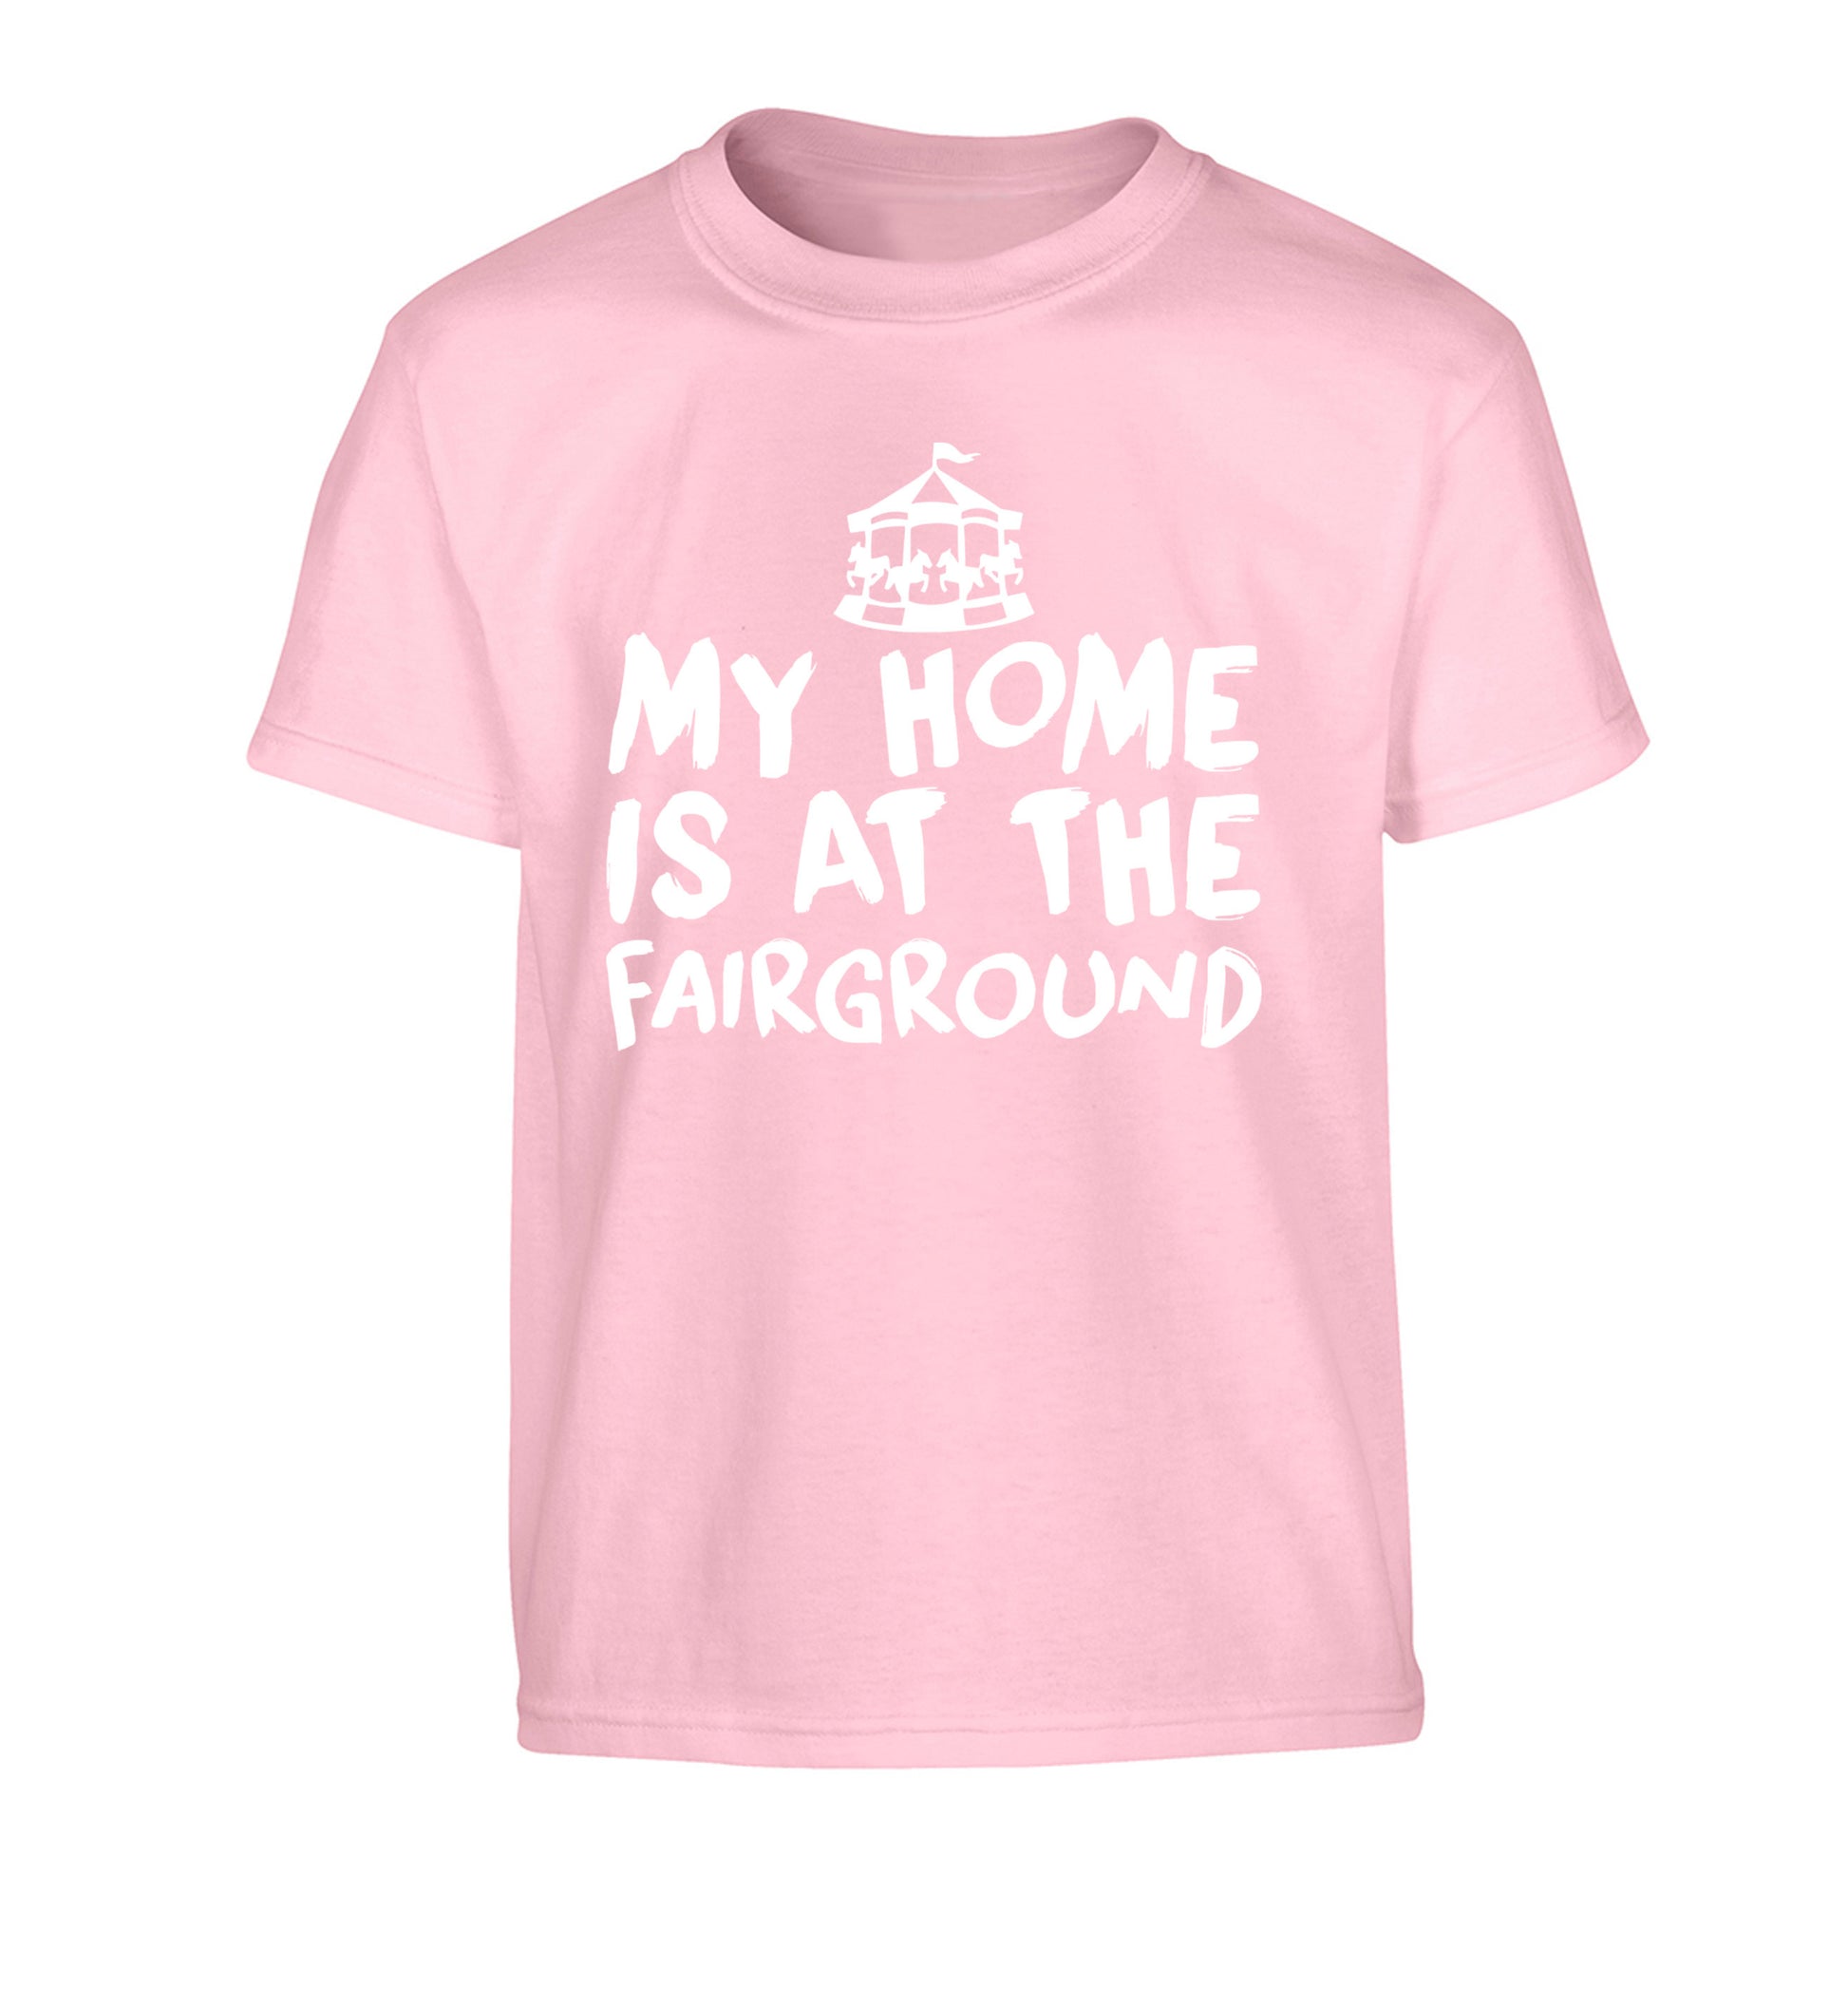 My home is at the fairground Children's light pink Tshirt 12-14 Years